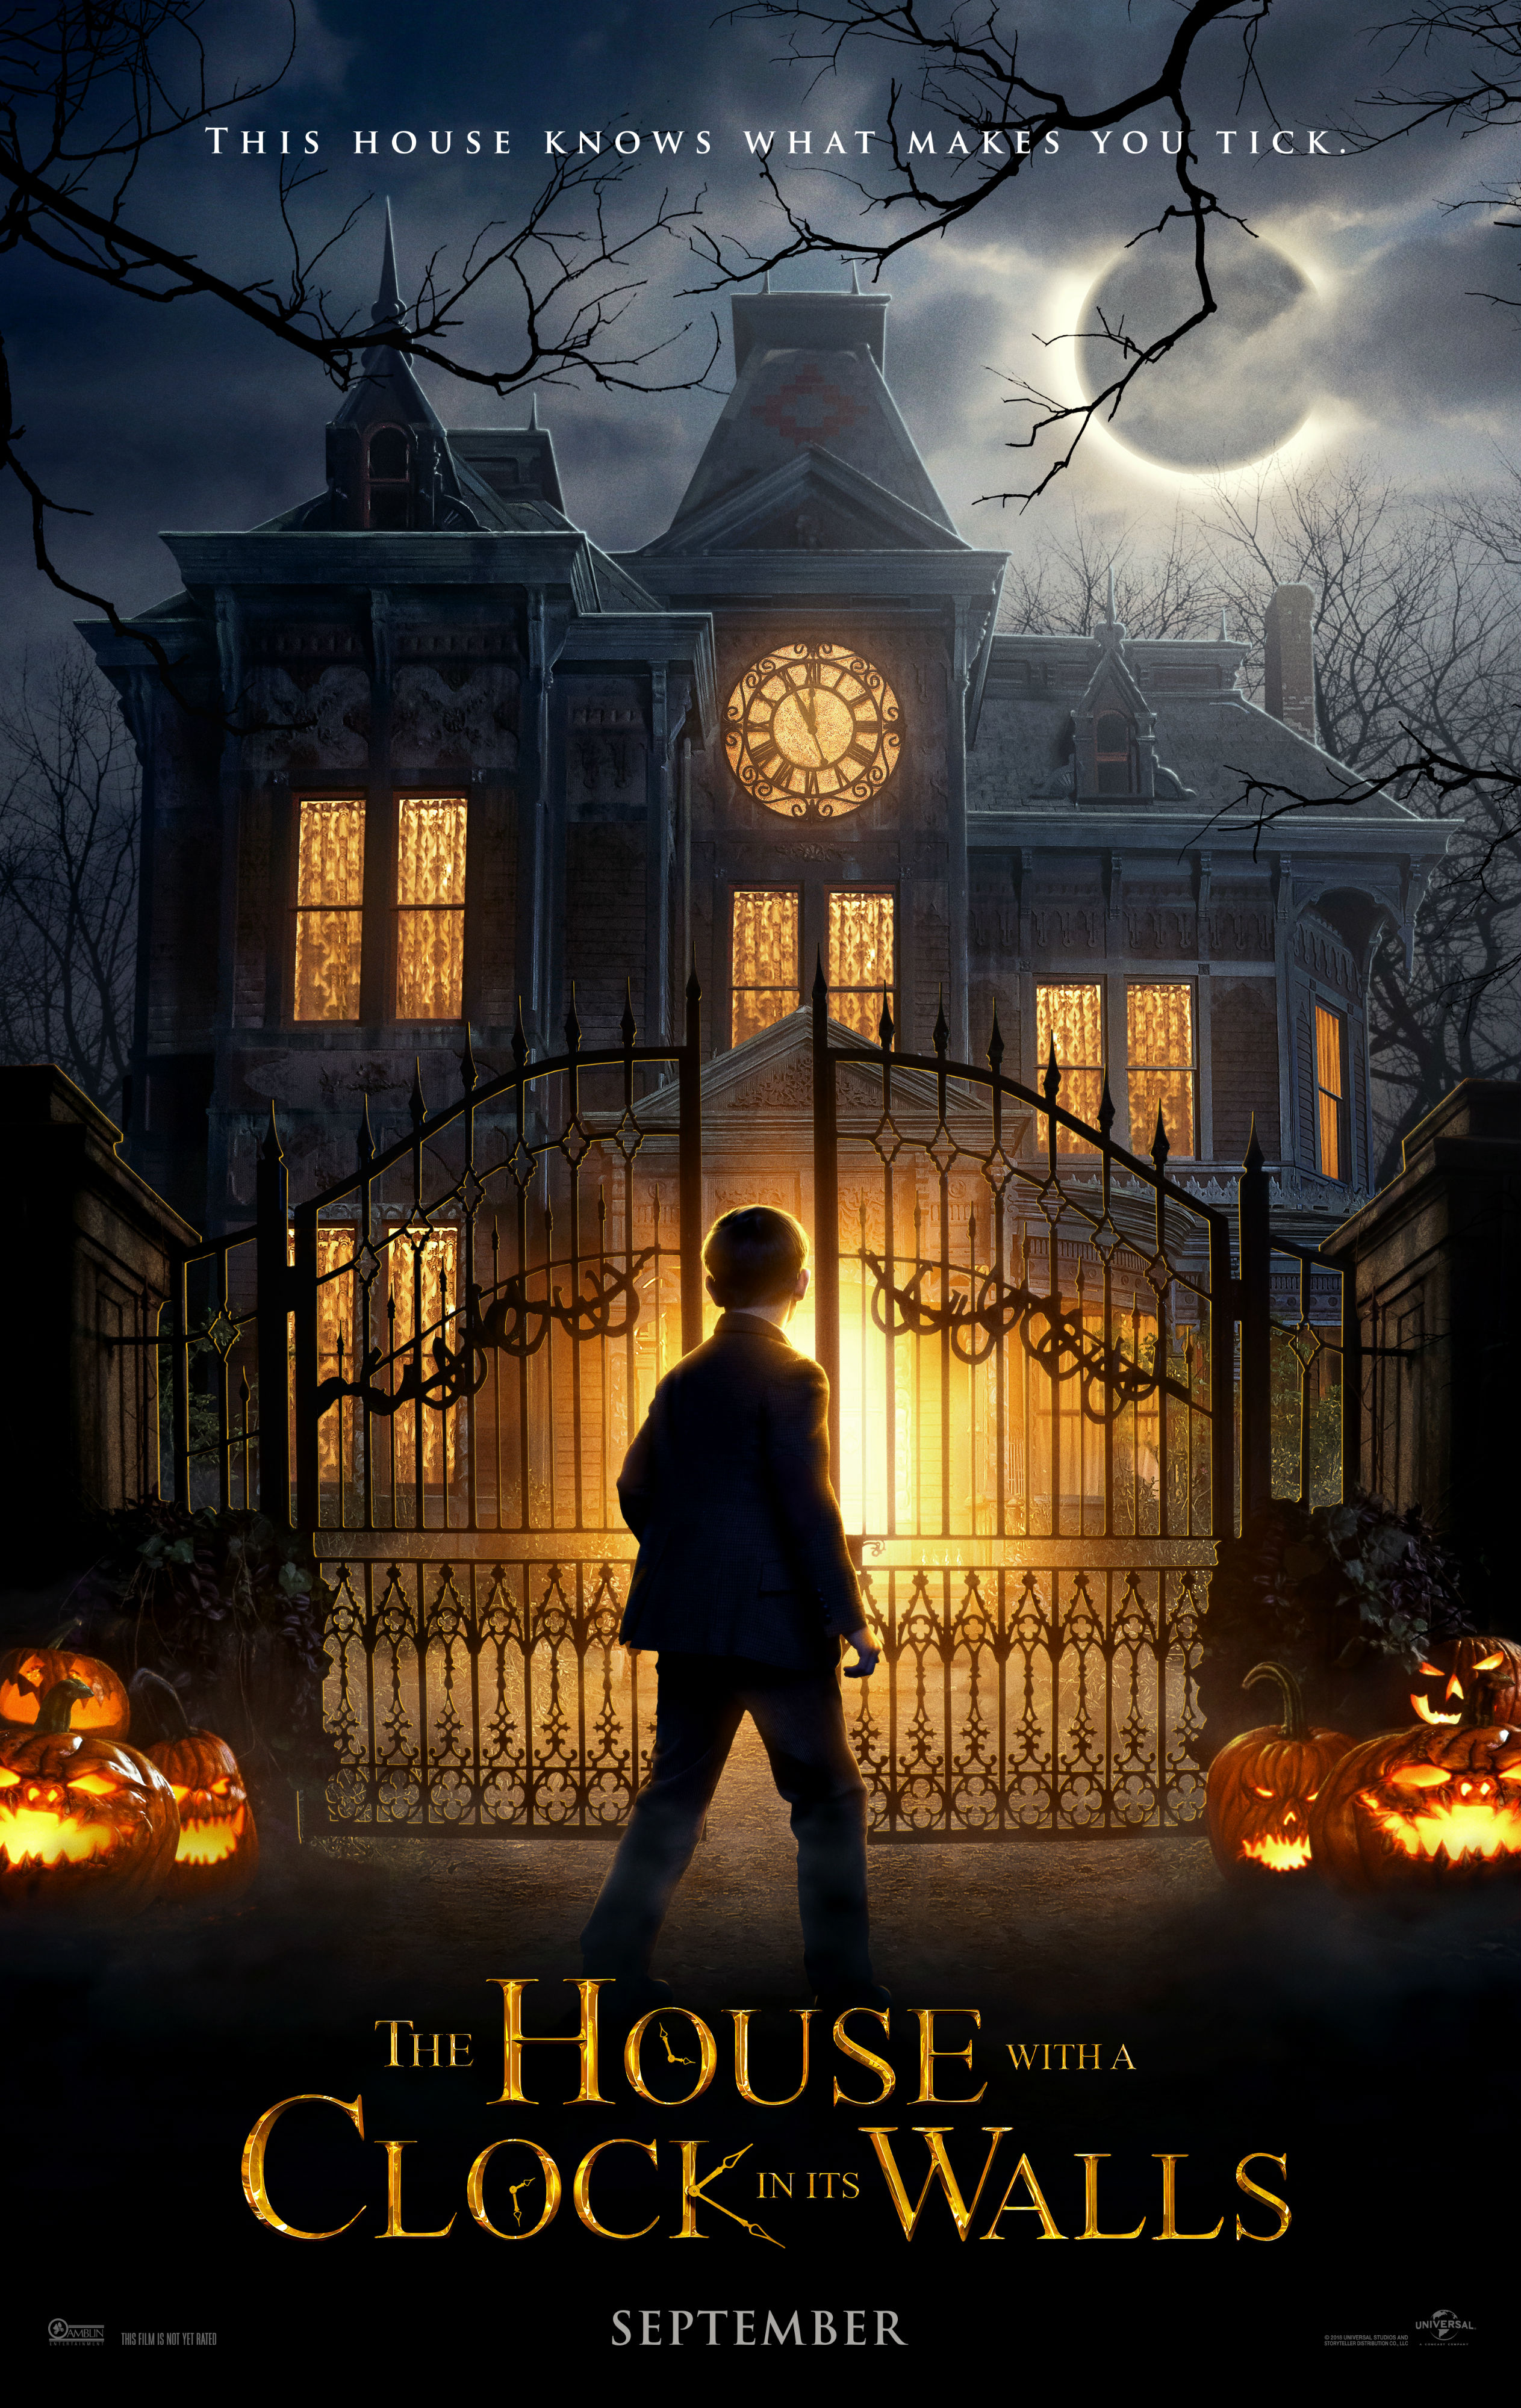 Trailer To The House with a Clock in Its Walls Starring Jack Black - Movies Like The House With A Clock In Its Walls